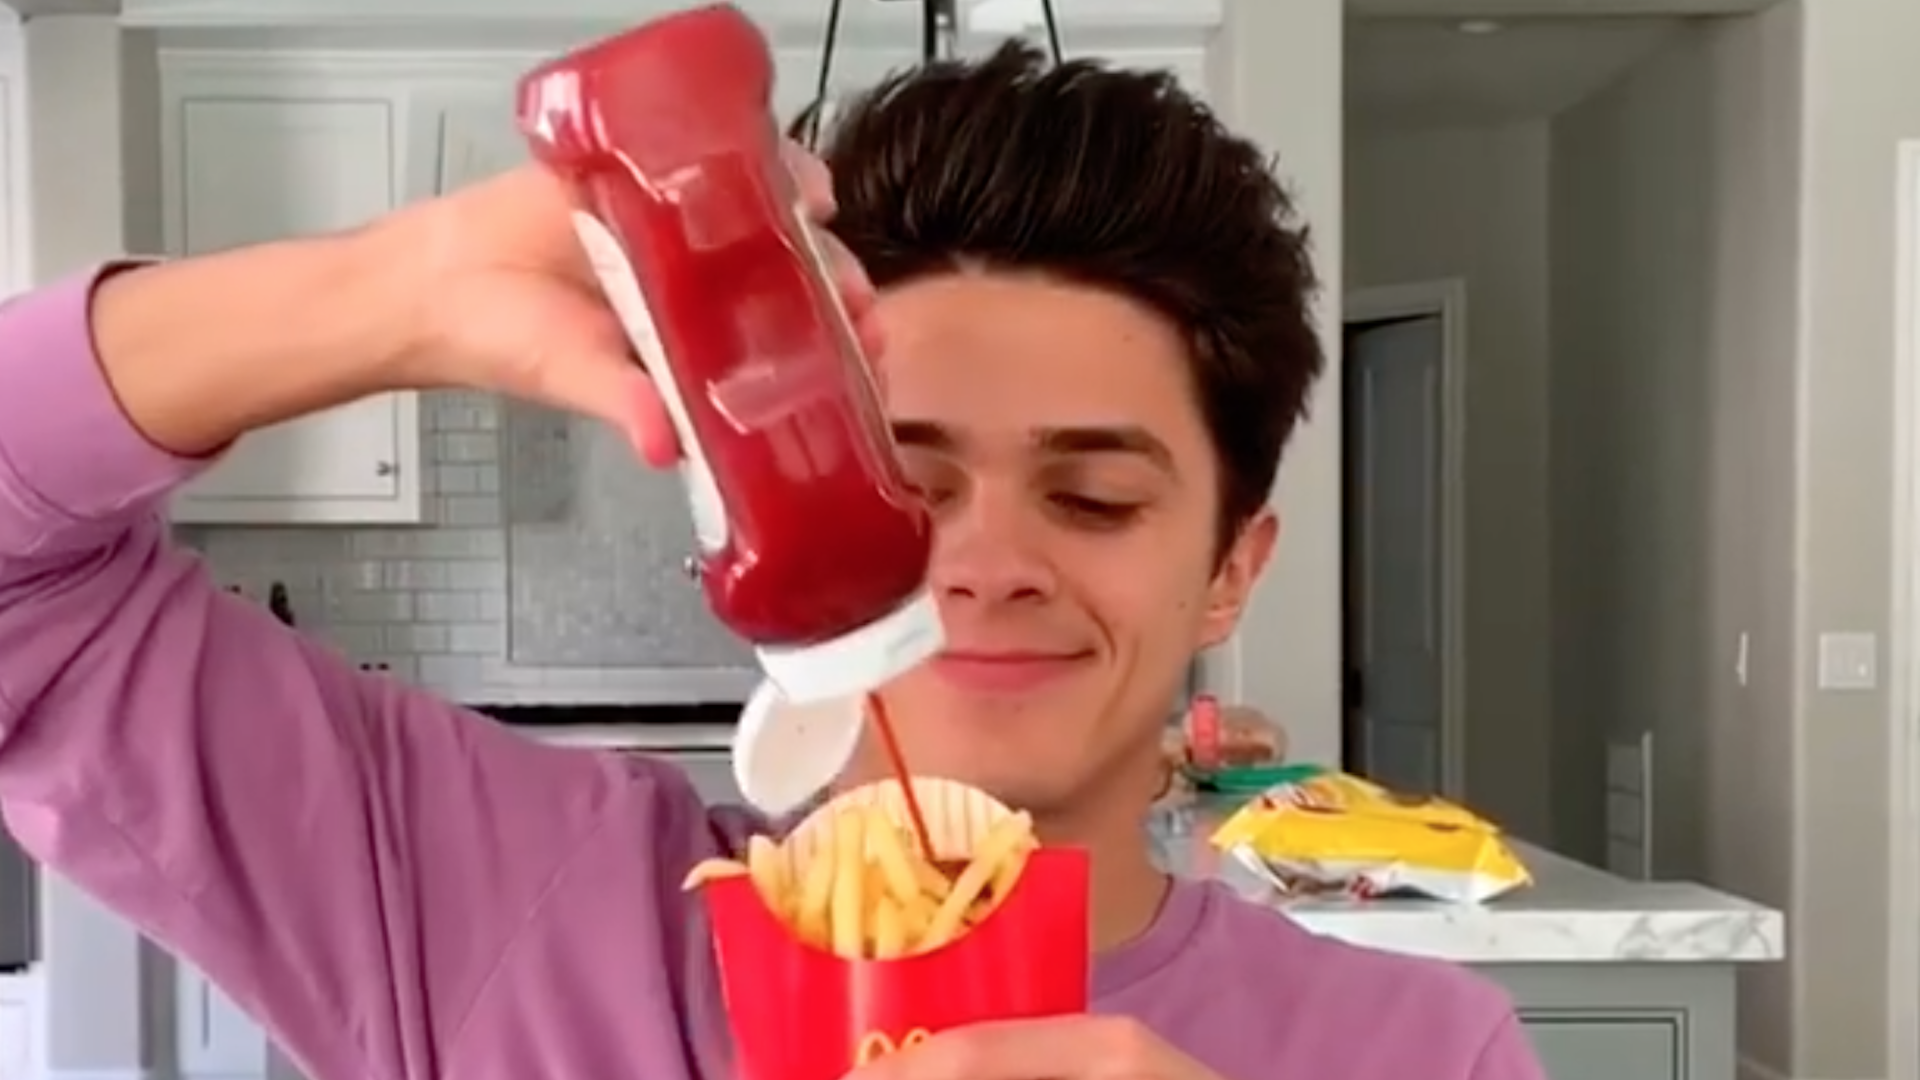 Brent squirting ketchup on fries